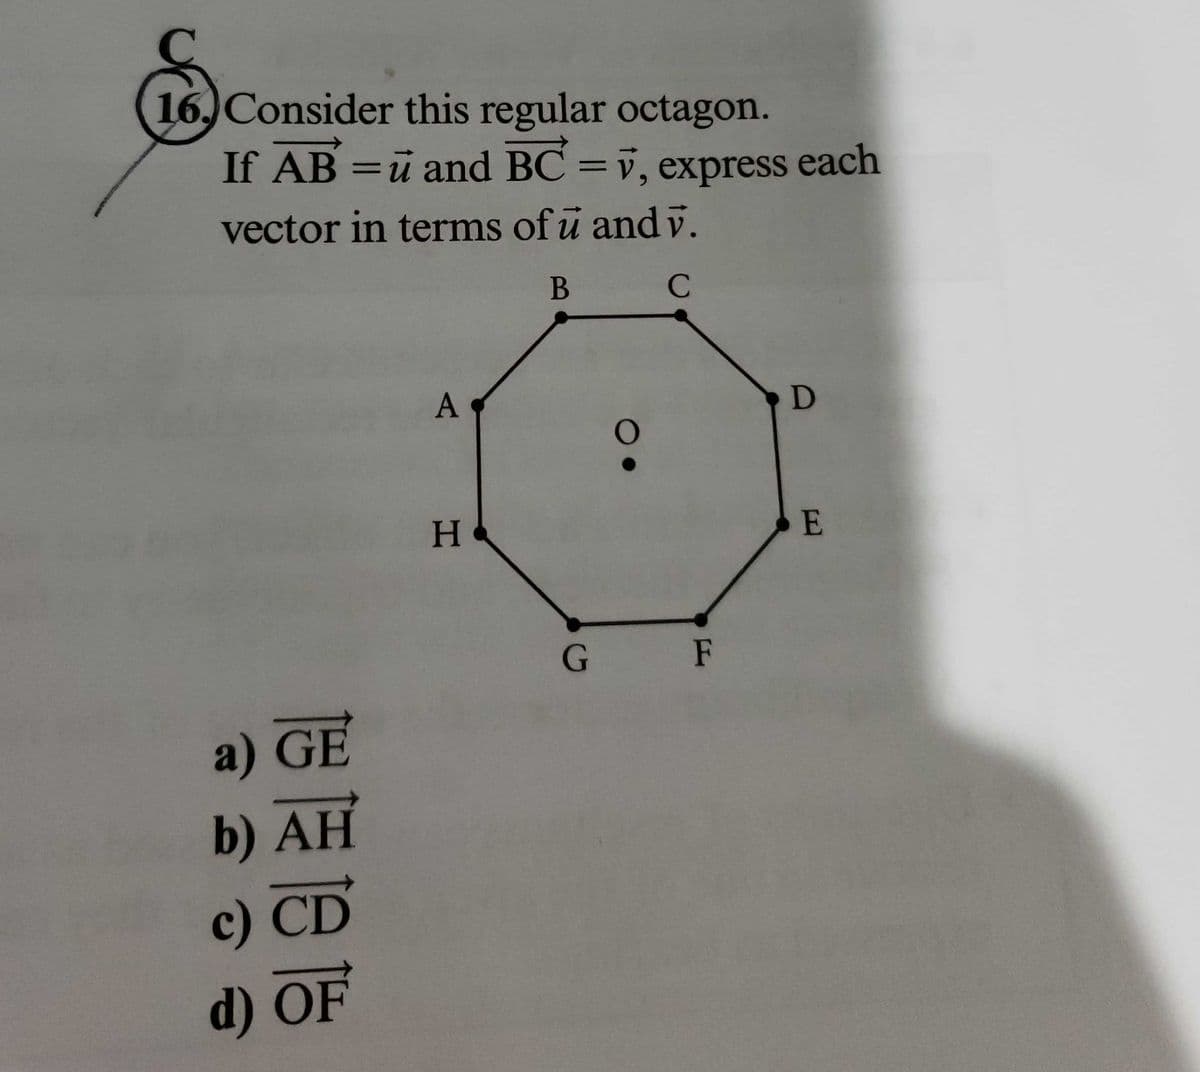 16. Consider this regular octagon.
If AB = u and BC= v, express each
vector in terms of u and v.
B
C
a) GE
b) AH
c) CD
d) OF
A
H&
G
F
D
E